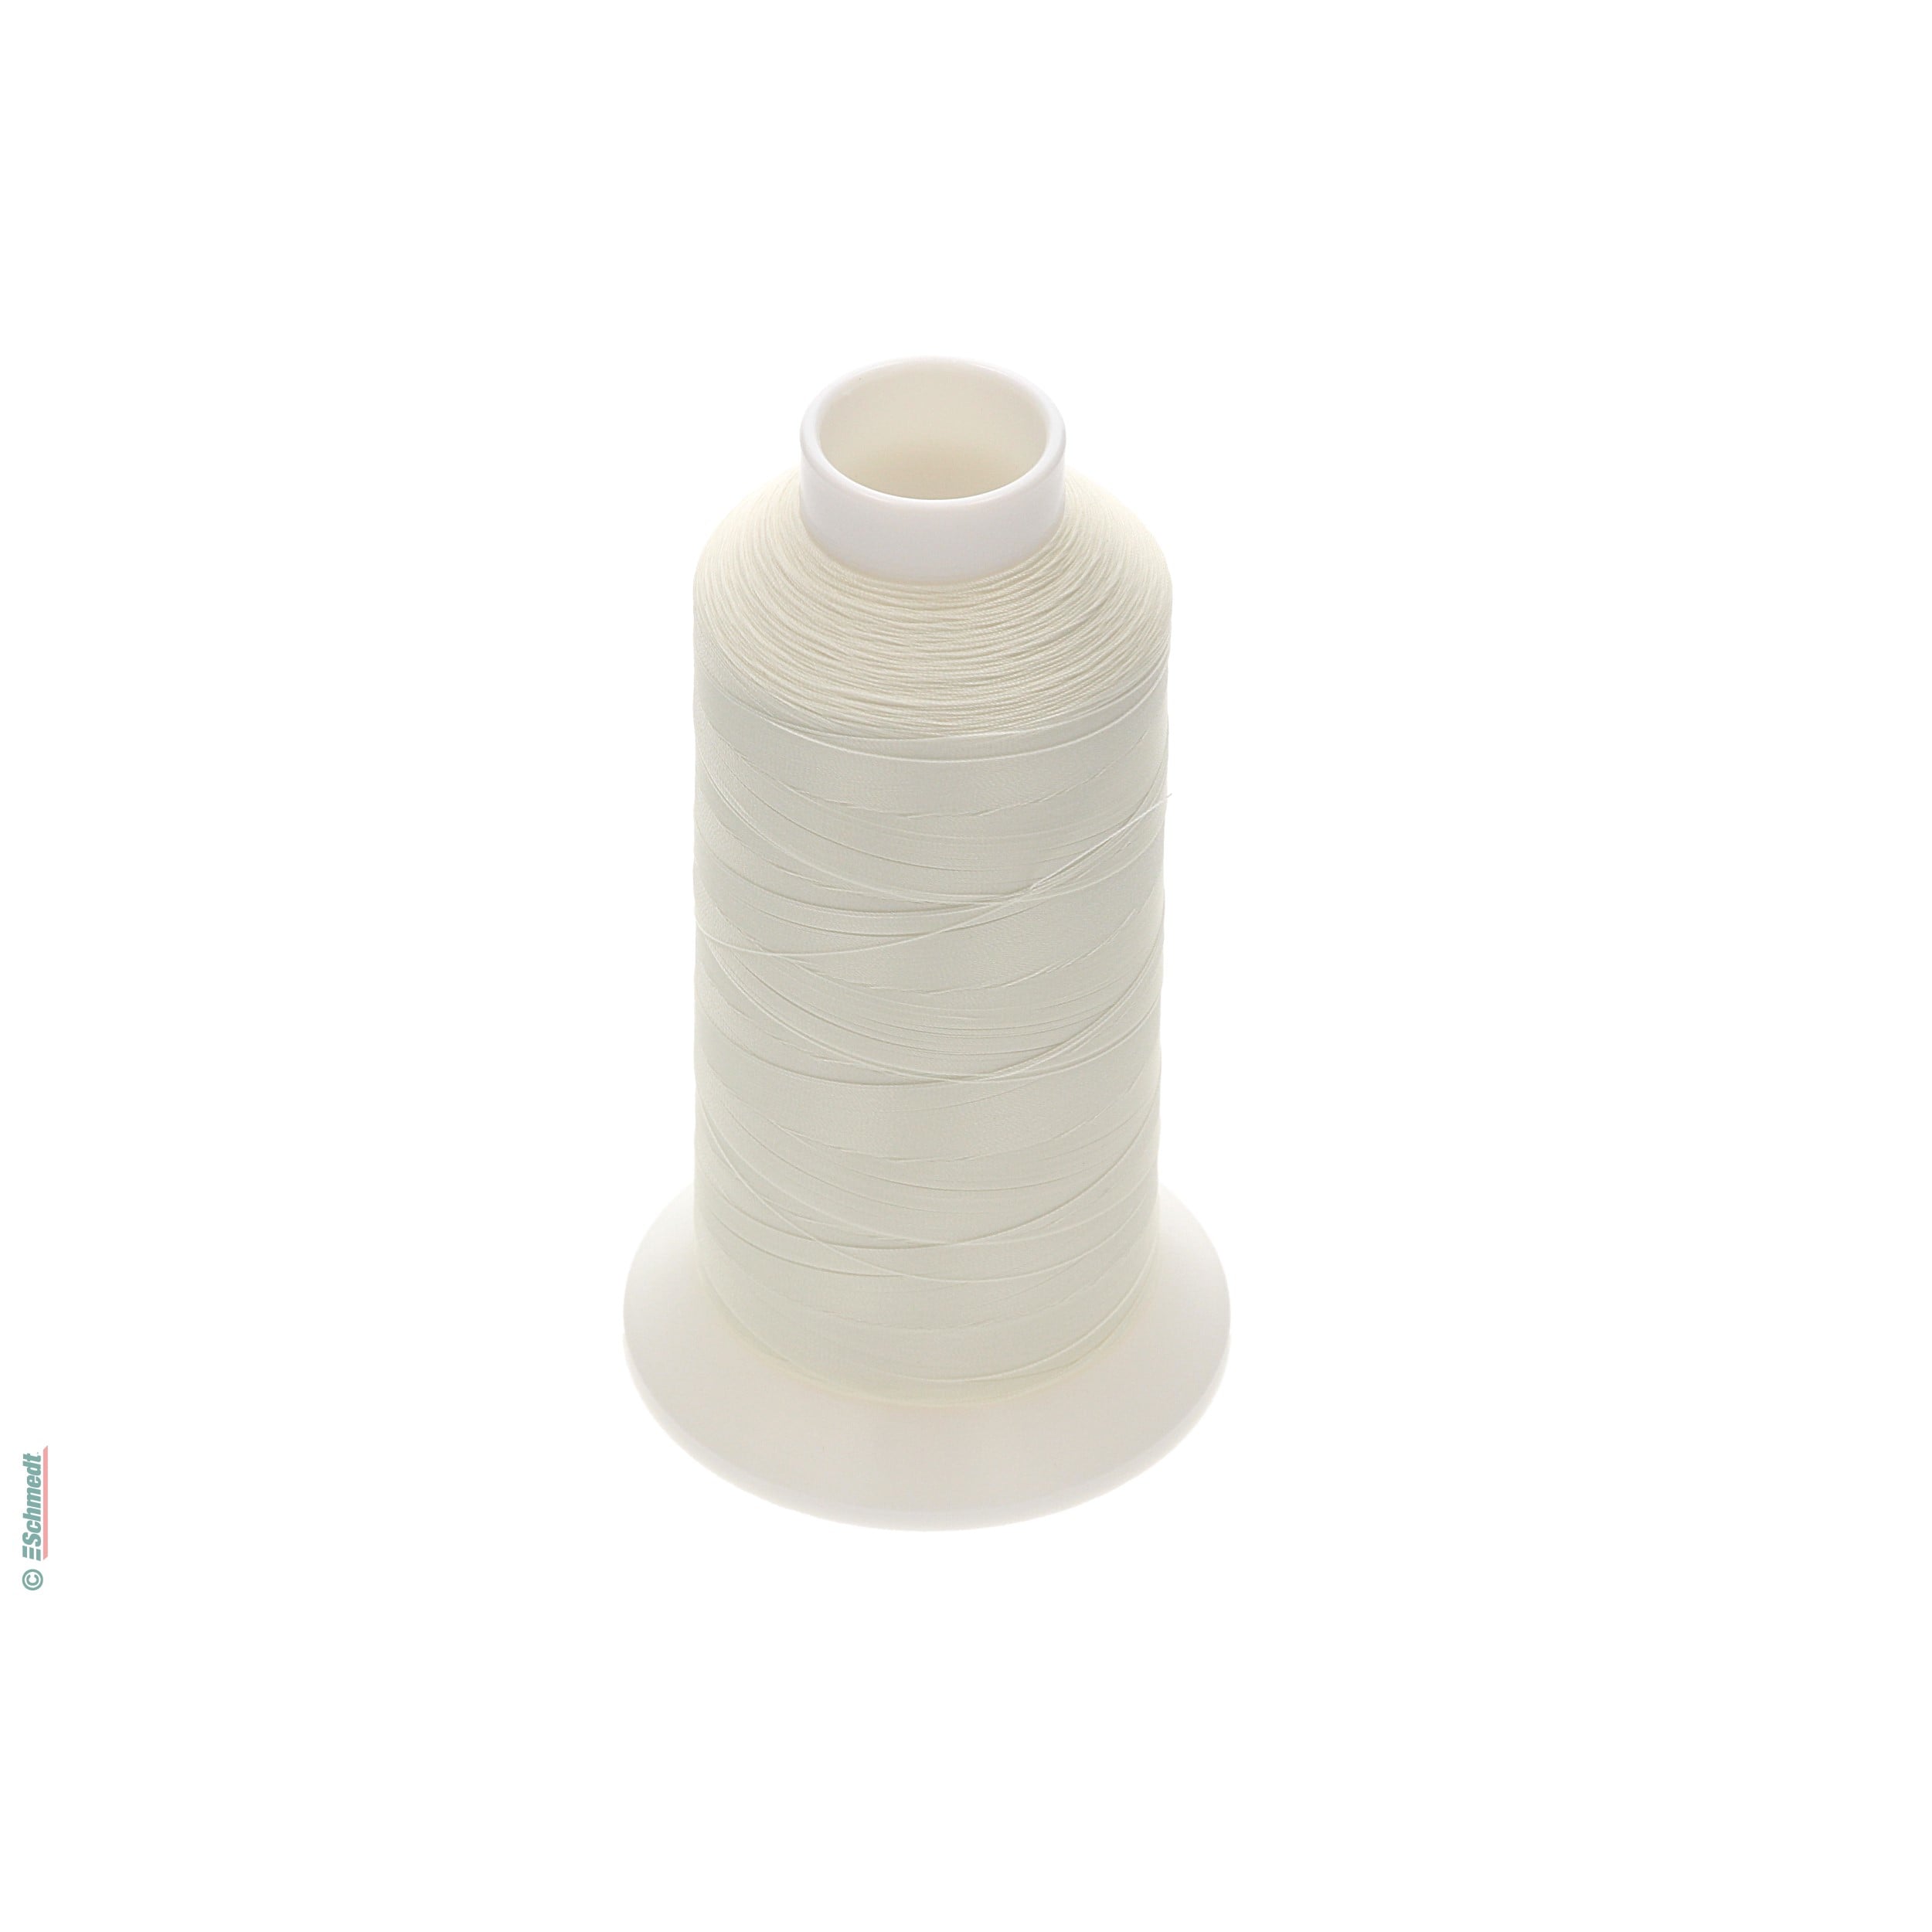 Getafil P  80/3 - polyester thread, high strength - Spool / 4000 m - for thread-stitching on sewing machines...